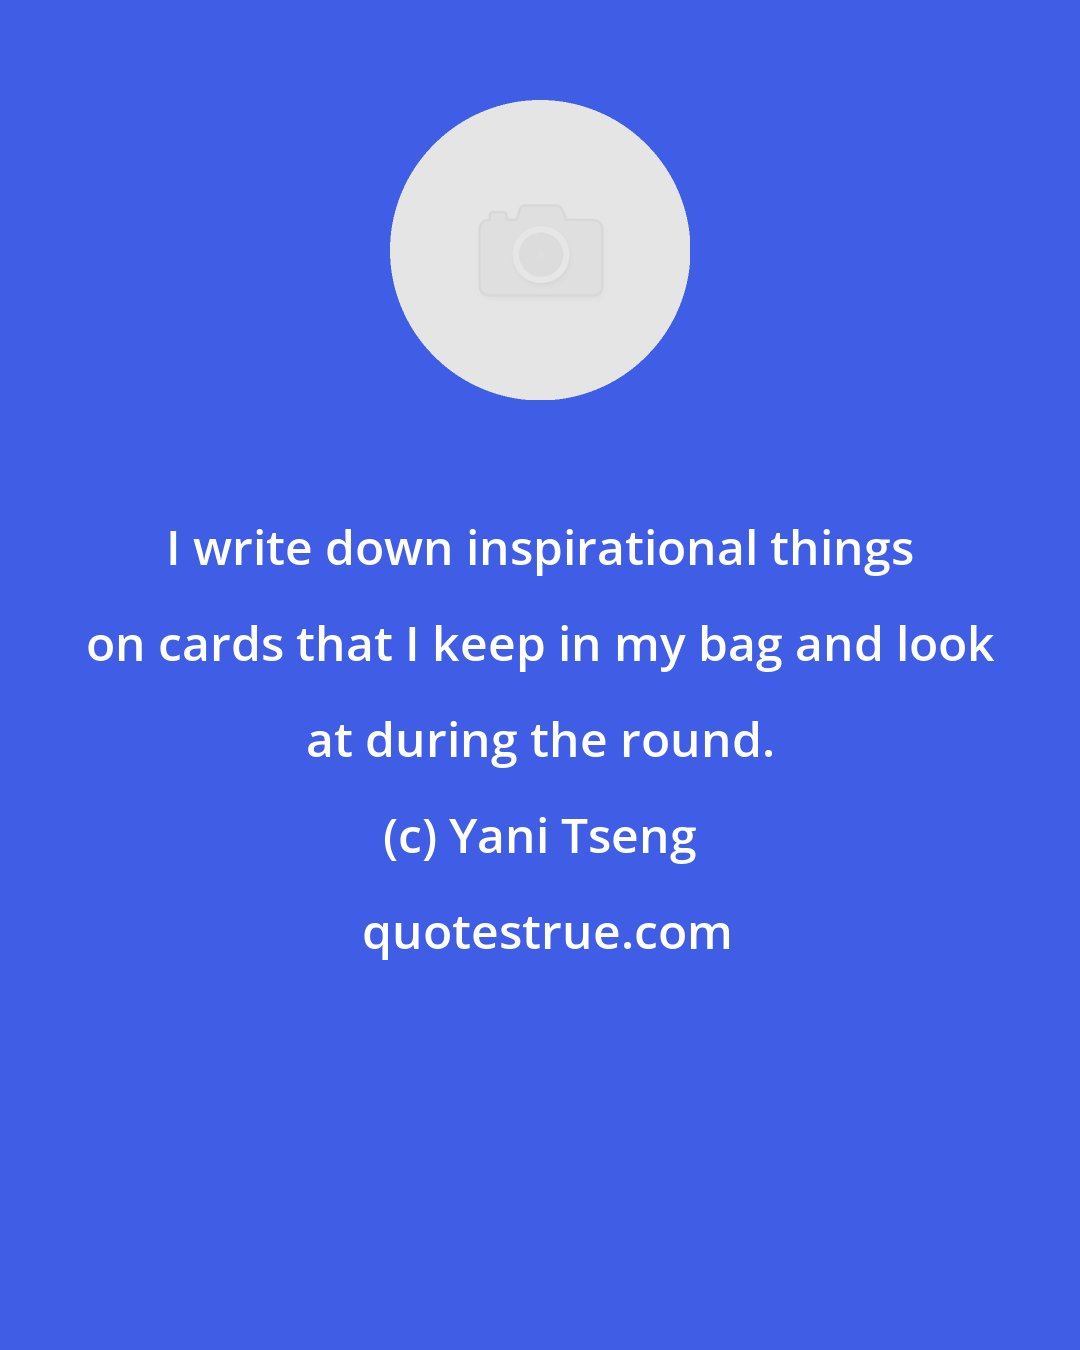 Yani Tseng: I write down inspirational things on cards that I keep in my bag and look at during the round.